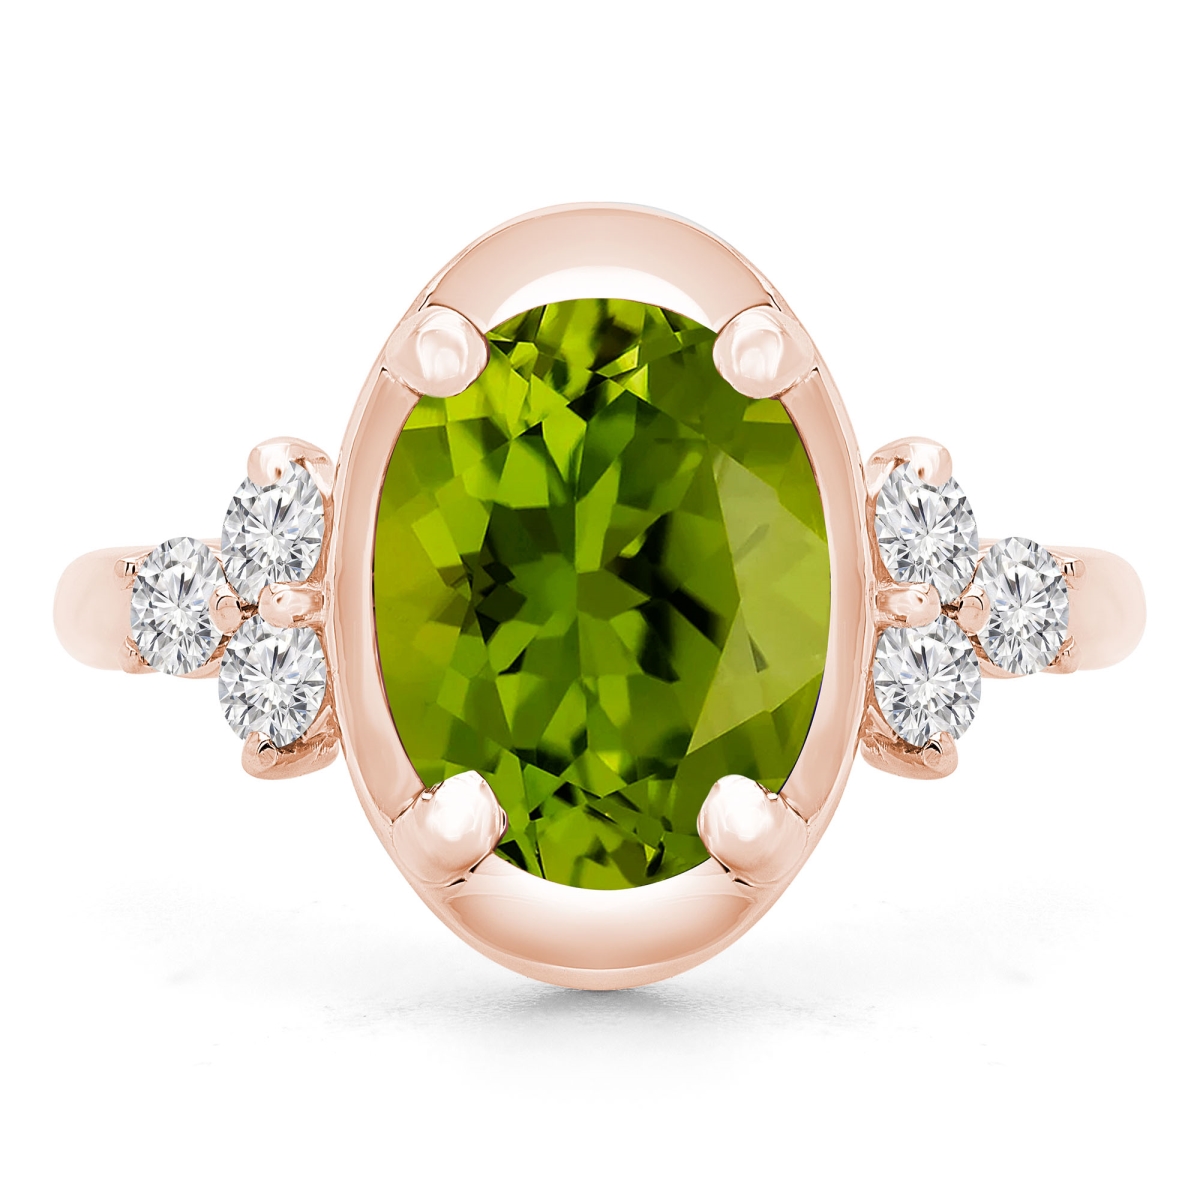 Picture of Majesty Diamonds MD190412-5.25 3.9 CTW Oval Green Peridot Cocktail Ring in 14K Rose Gold - Size 5.25